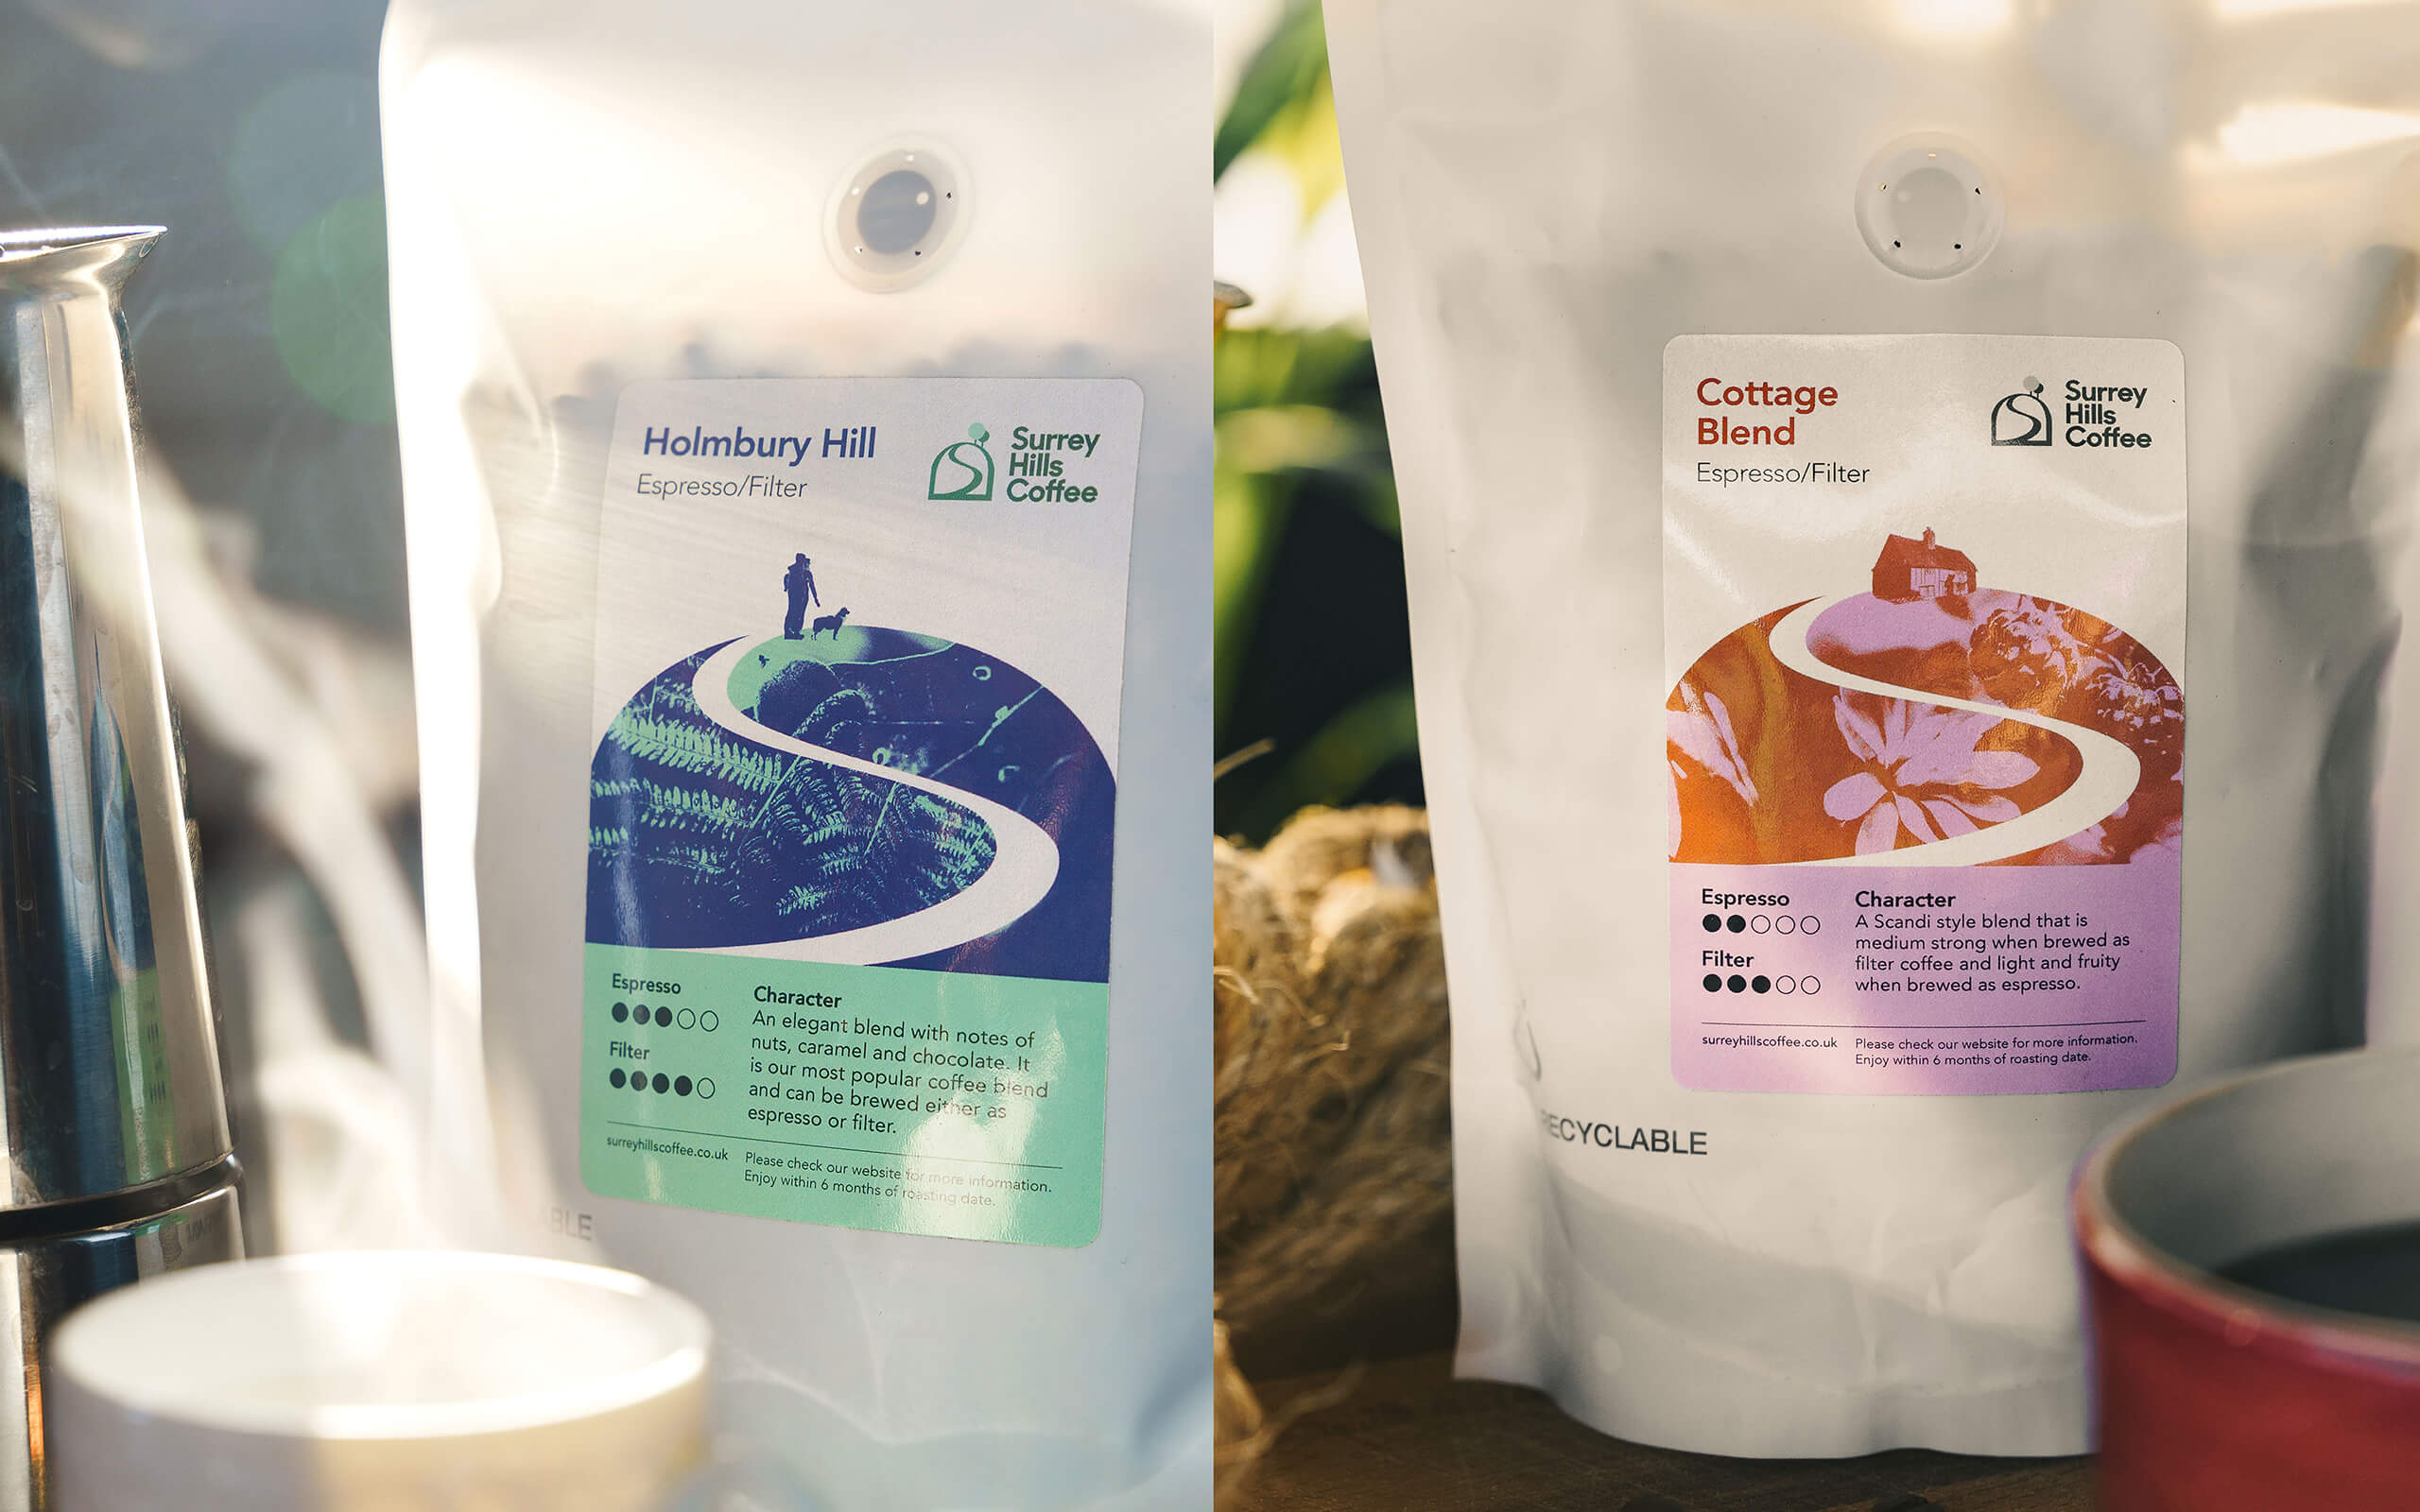 Taller Design Creates Surrey Hills Coffee Brand and Packaging